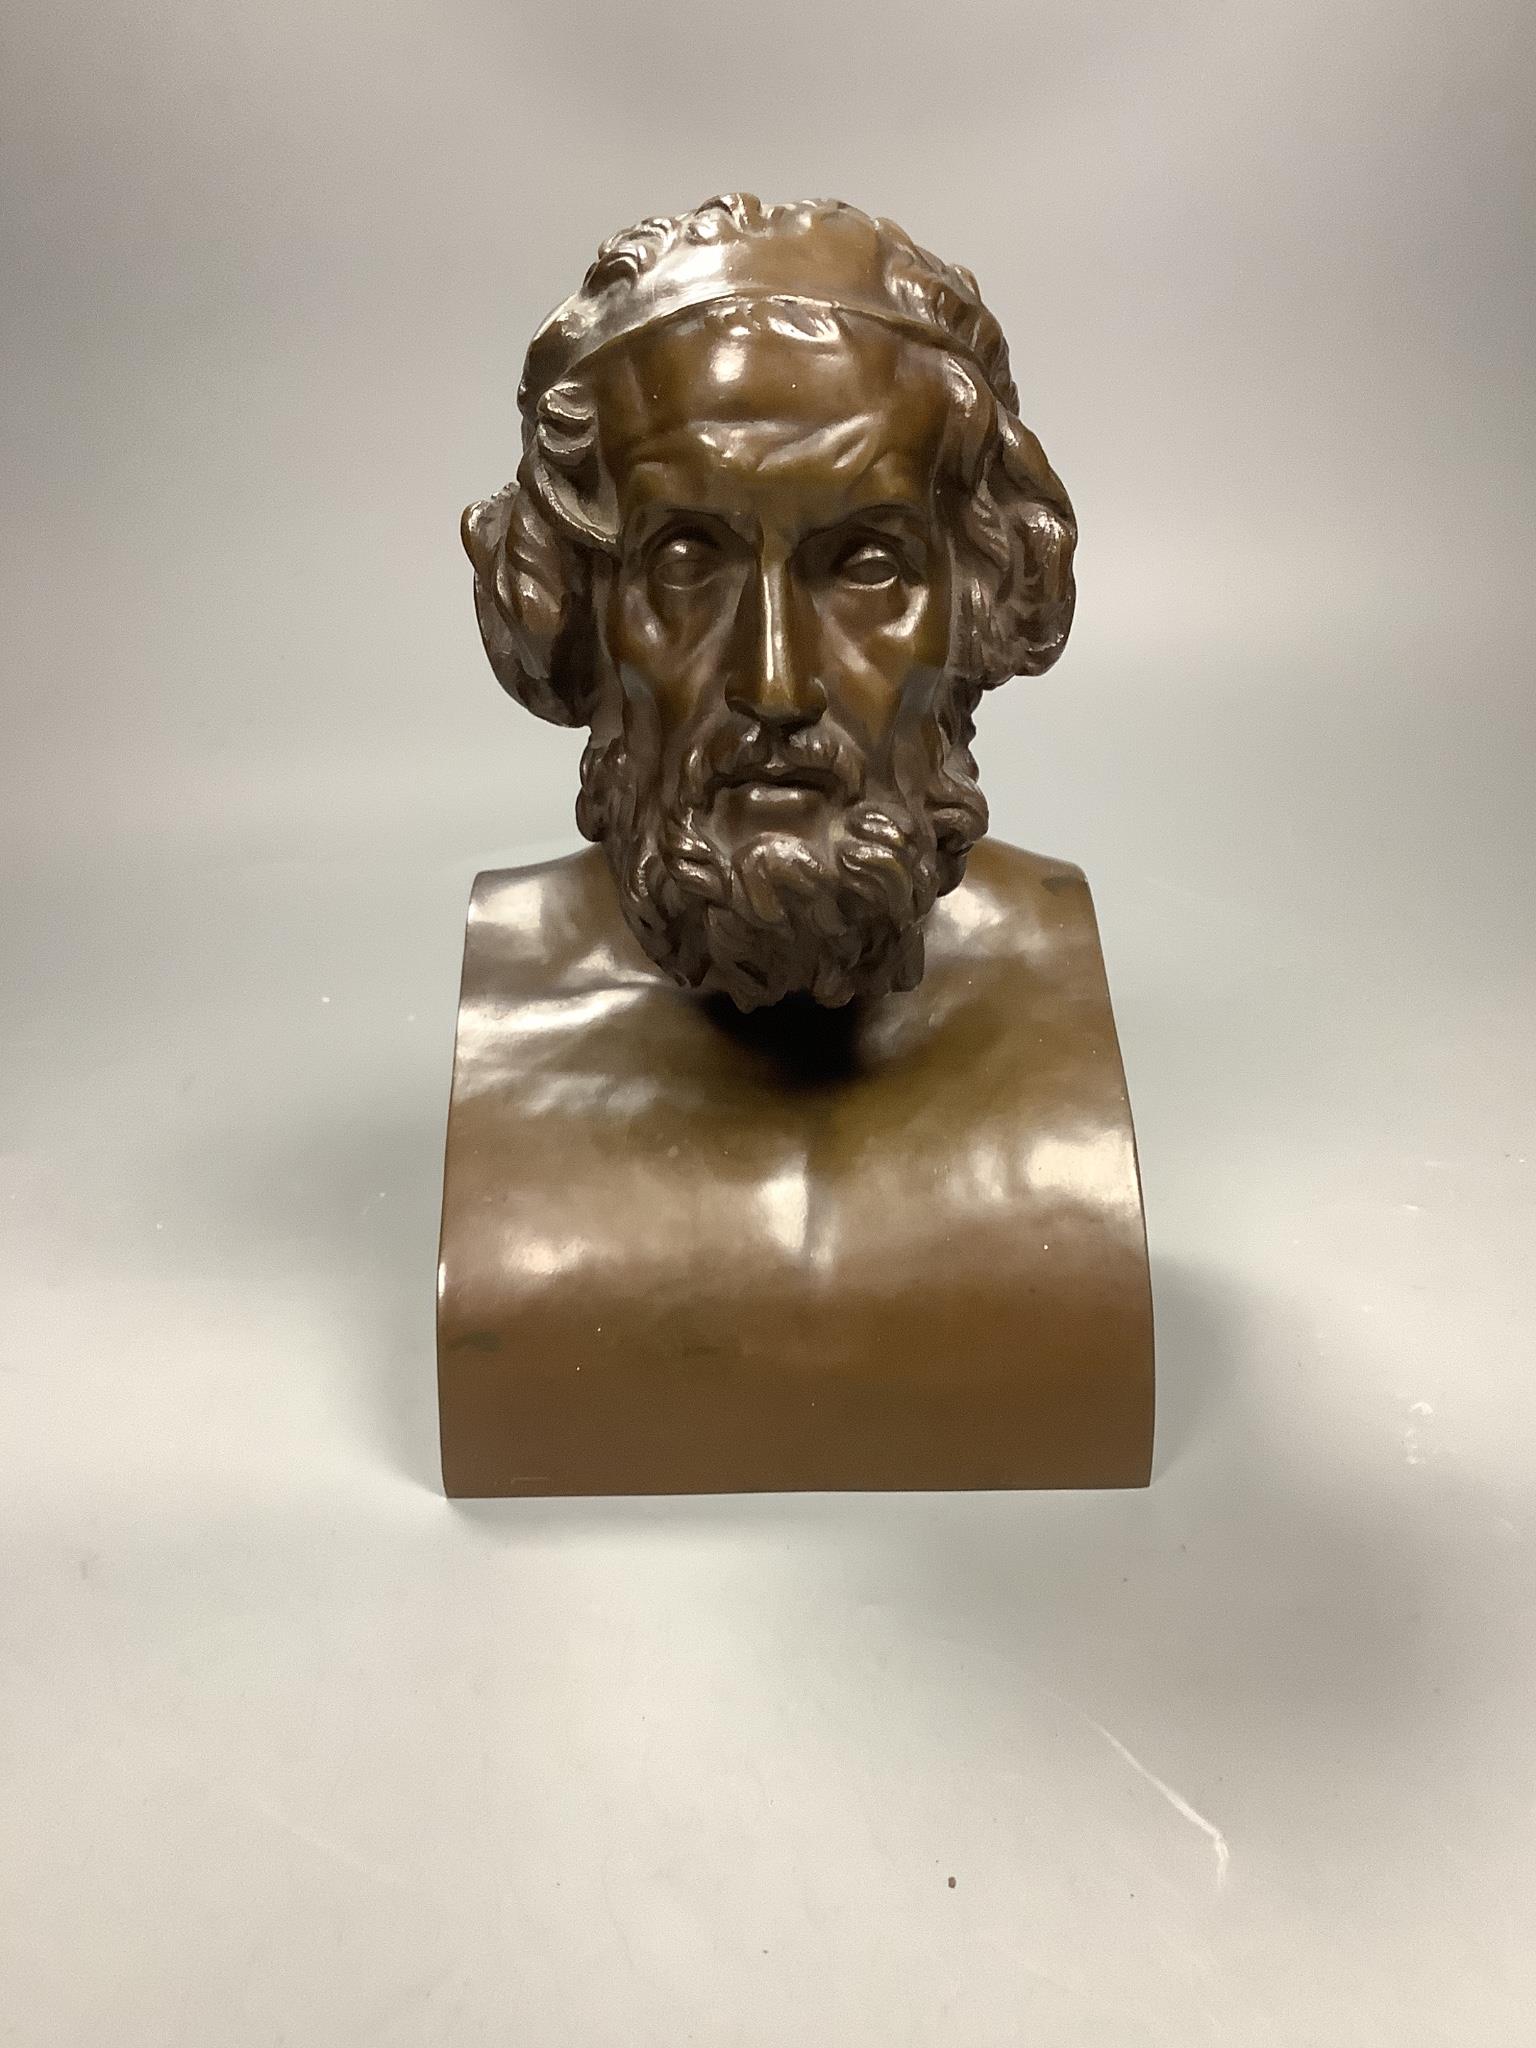 F. Barbedienne bronze bust of Homer, late 19th century, 21 cm high